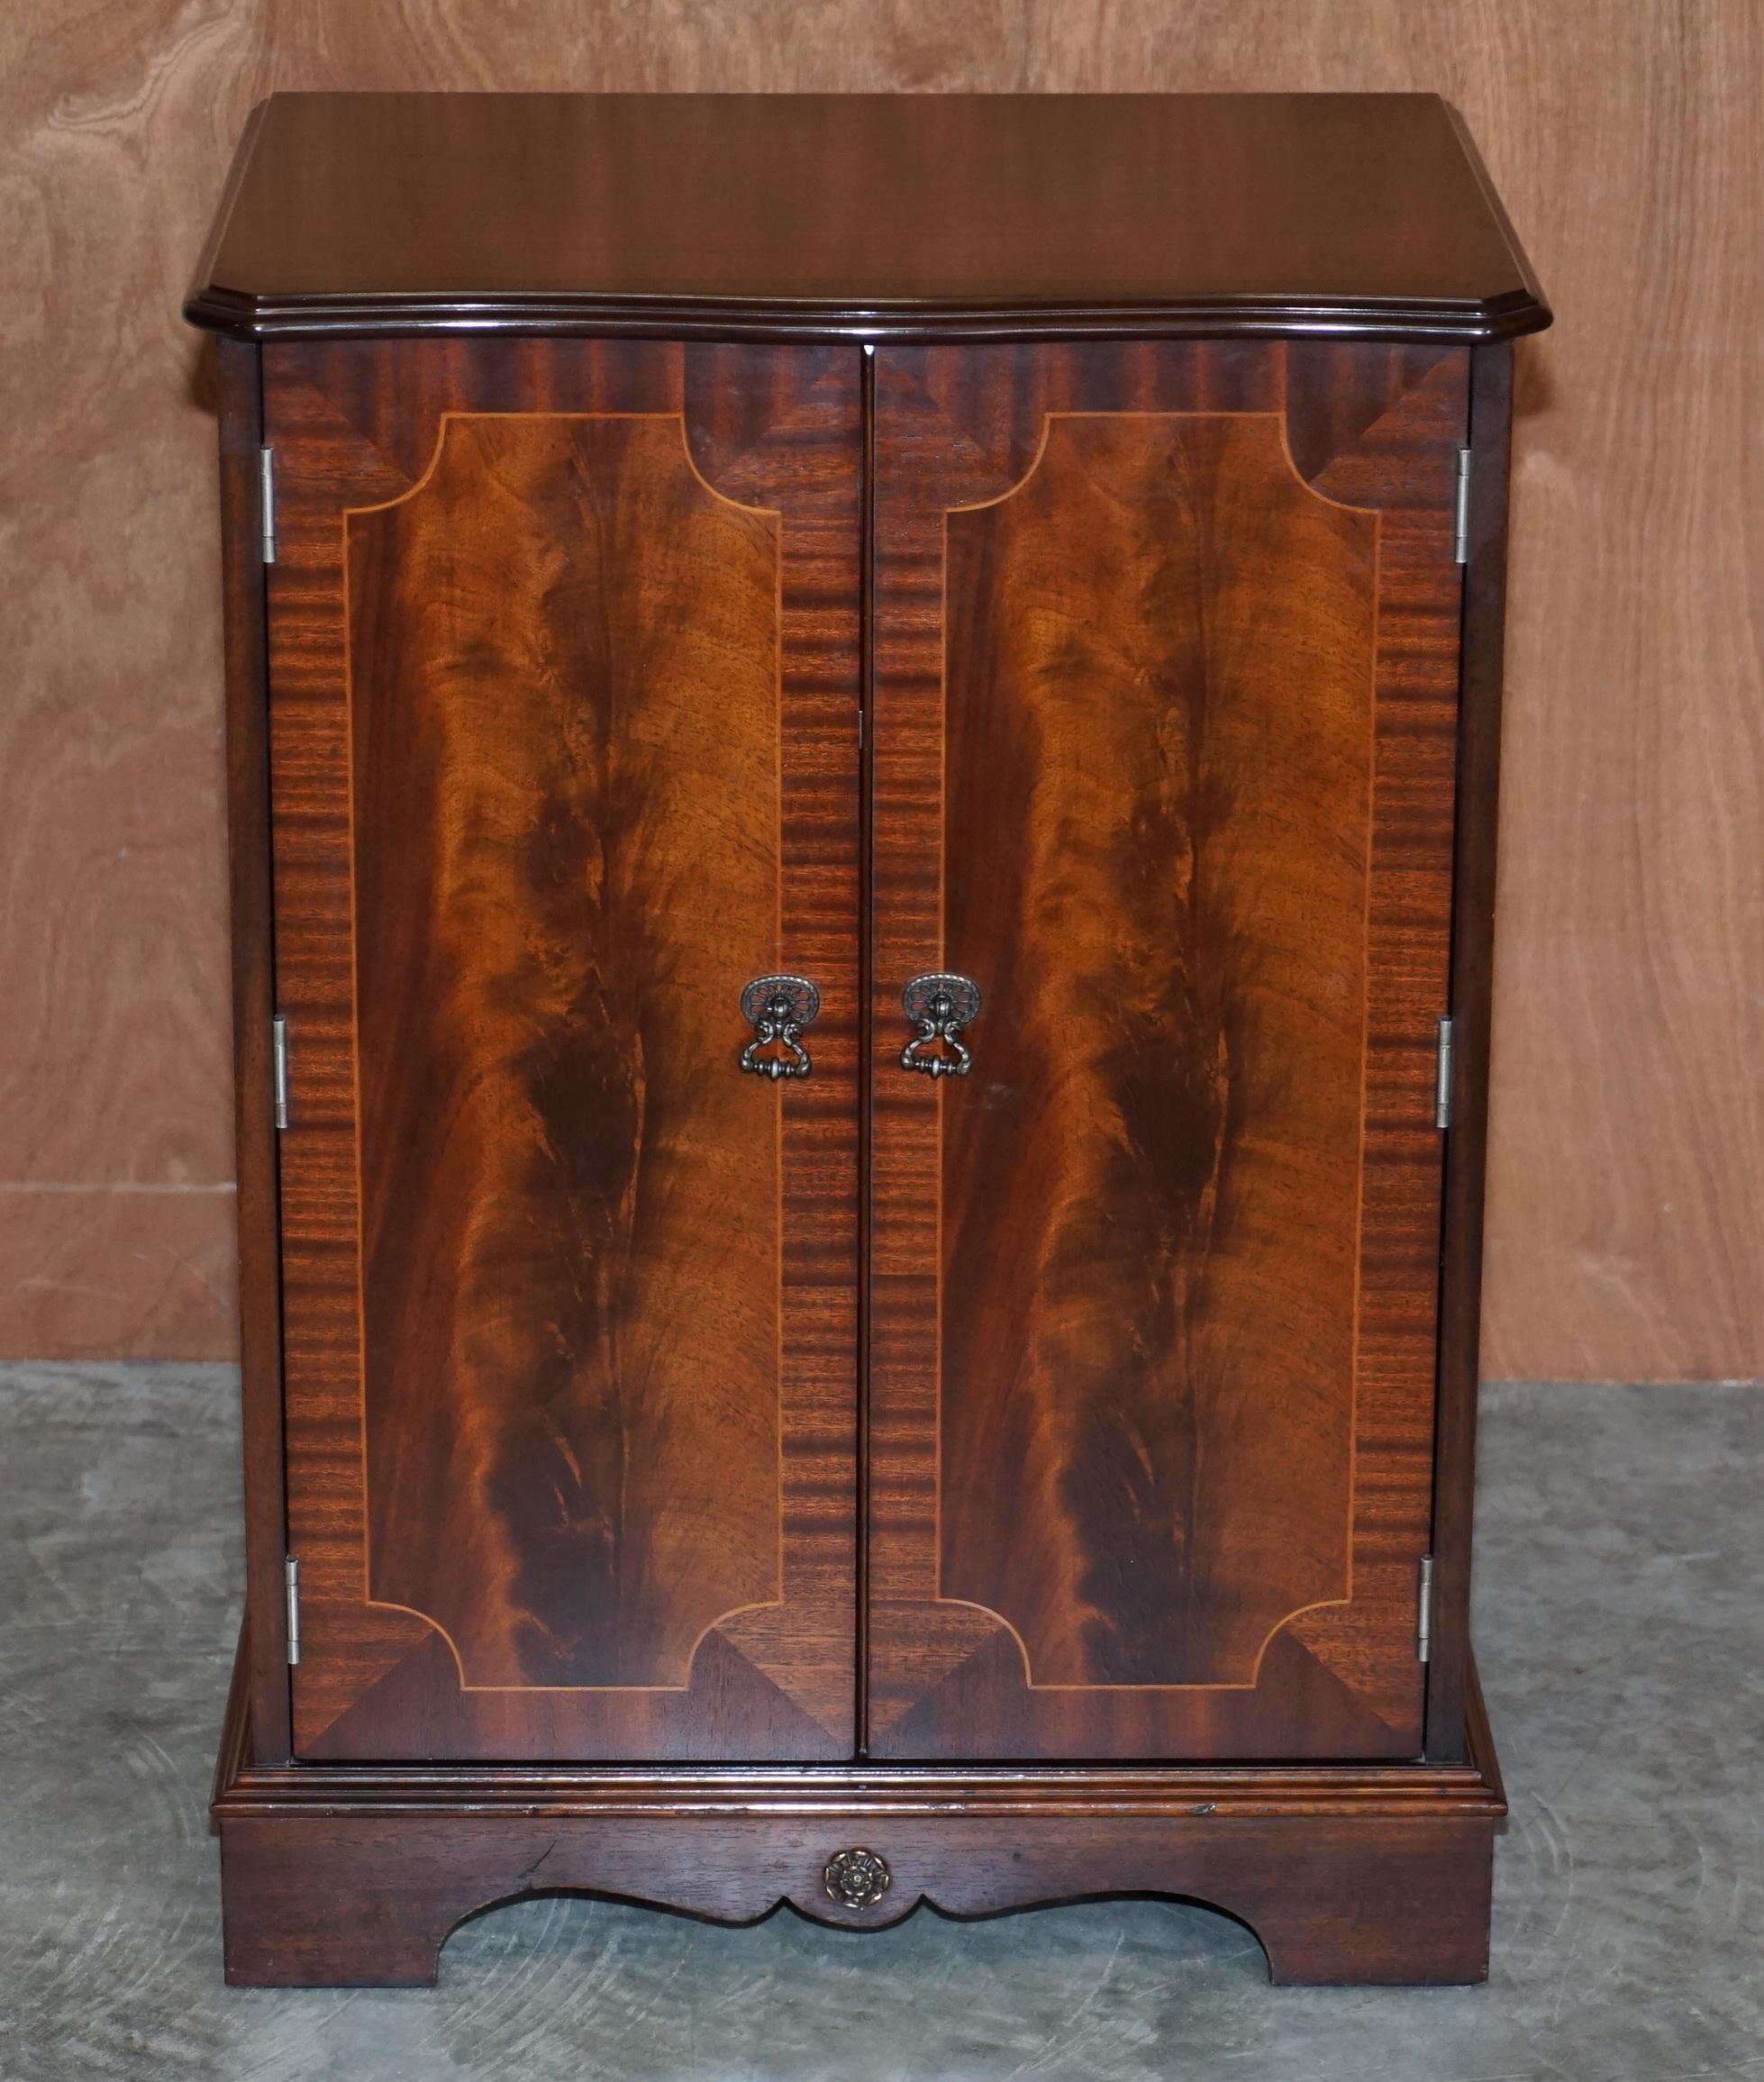 We are delighted to offer for sale this lovely Record Player flamed mahogany cupboard which is hidden as a Victorian style cupboard 

A very well made and decorative piece of metamorphic furniture, the top rises to reveal a space to hold a record